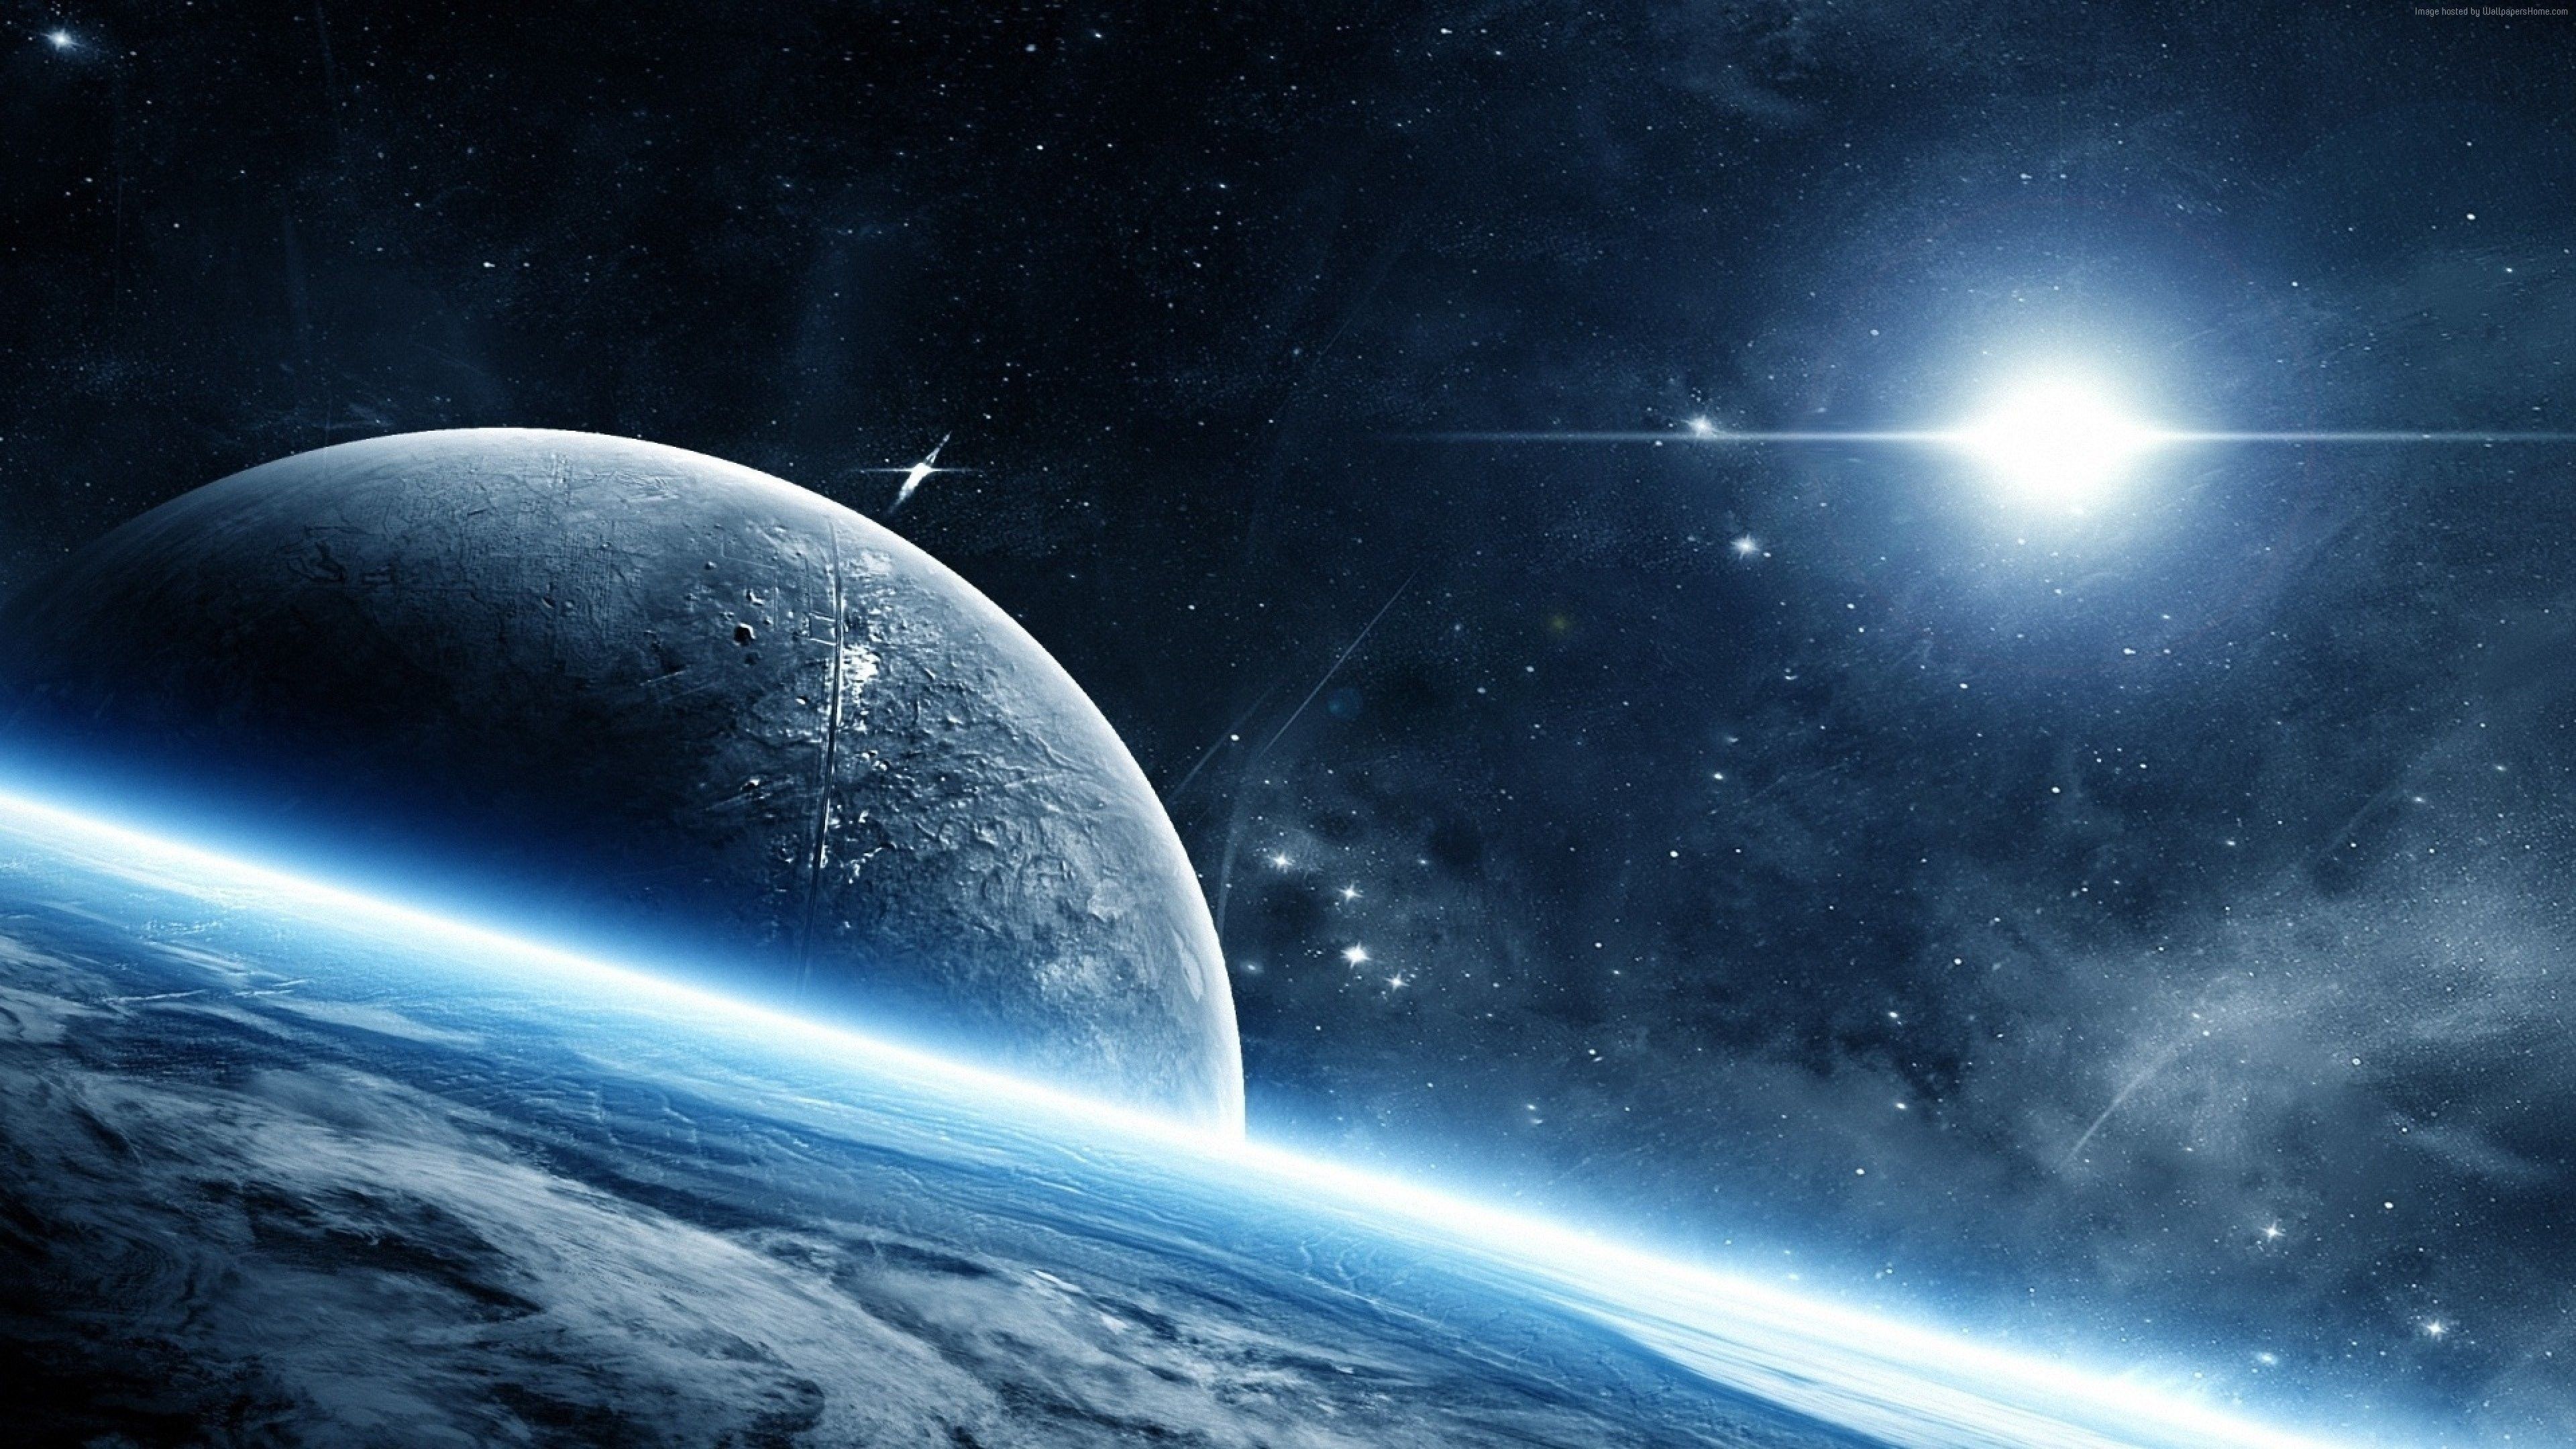 outer space planets wallpaper